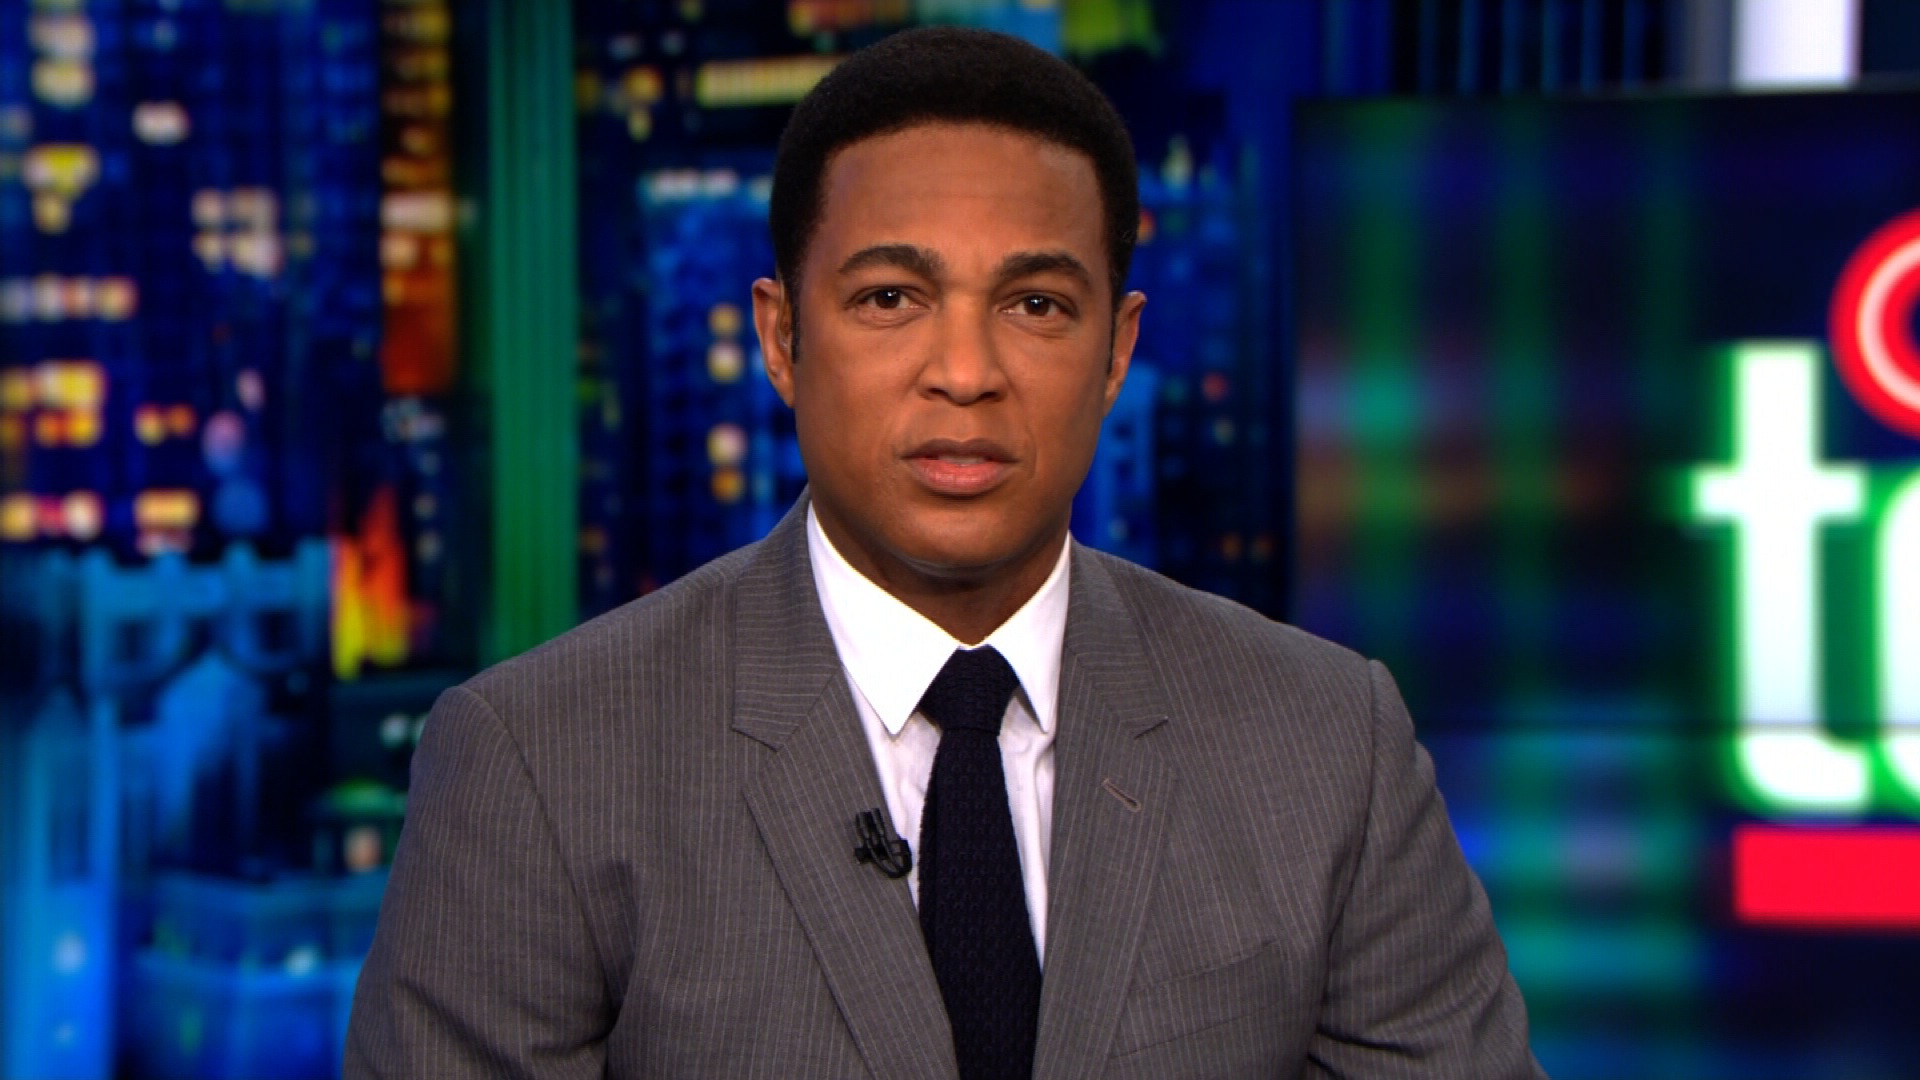 Don Lemon Responds to Donald Trump's Attacks Calling him the 'Dumbest Man on Television'